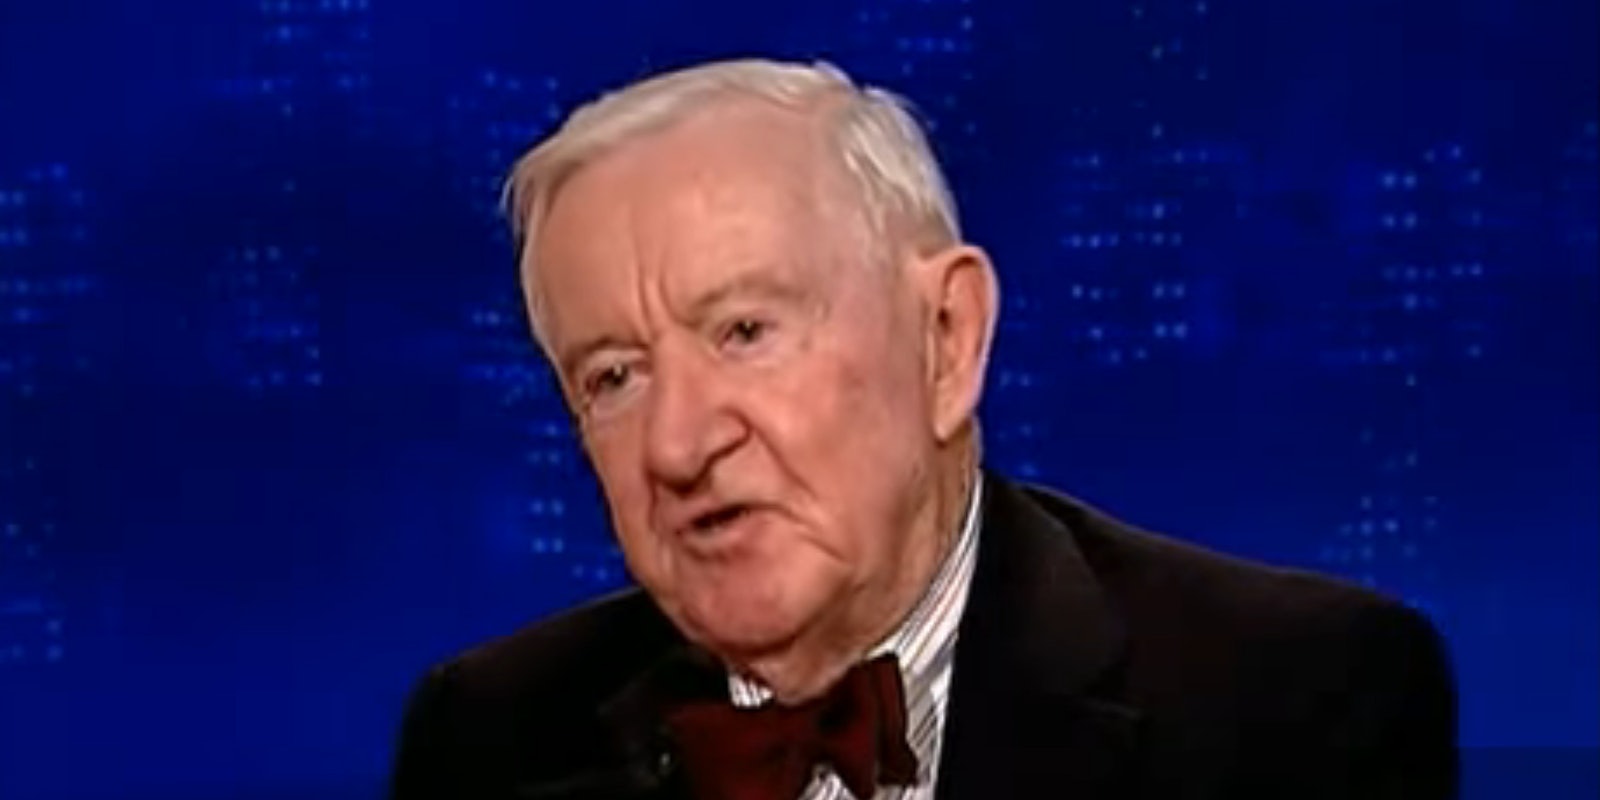 Retired Supreme Court Justice John Paul Stevens says young activists like the survivors of the Parkland, Florida school shooting should demand for the Second Amendment to be repealed.